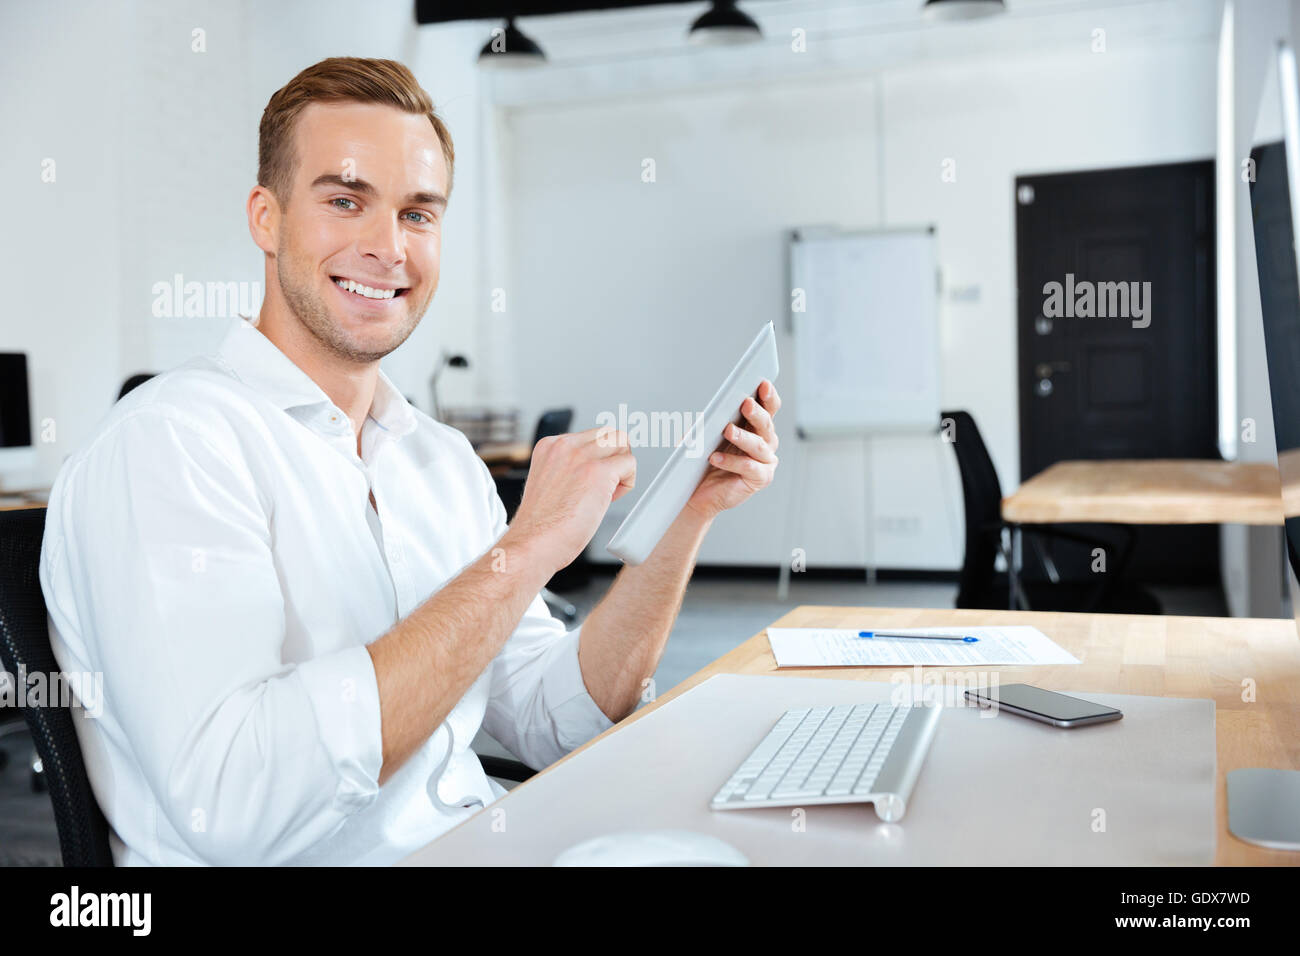 Cheerful young businessman smiling and using tablet à la table Banque D'Images